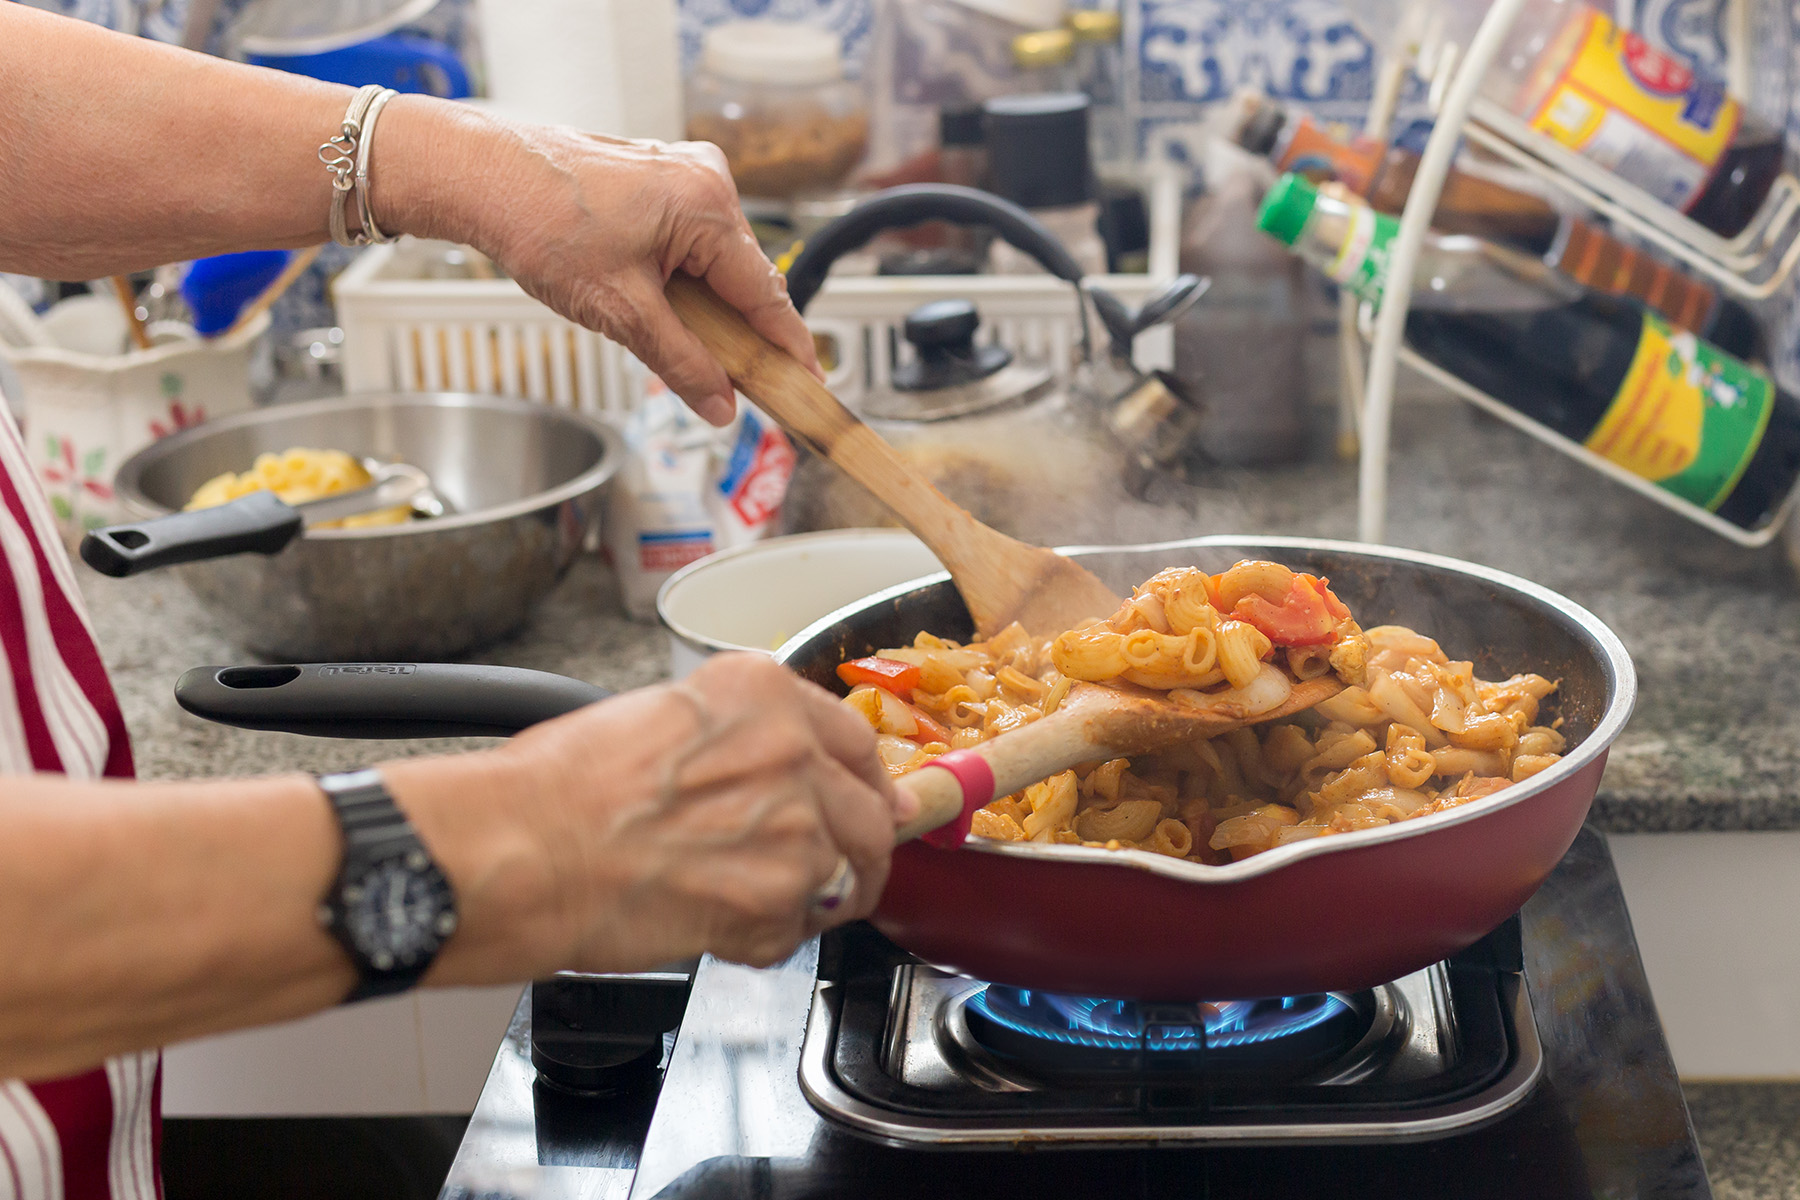 Close up of hands cooking a meal on a gas stove in Thailand

